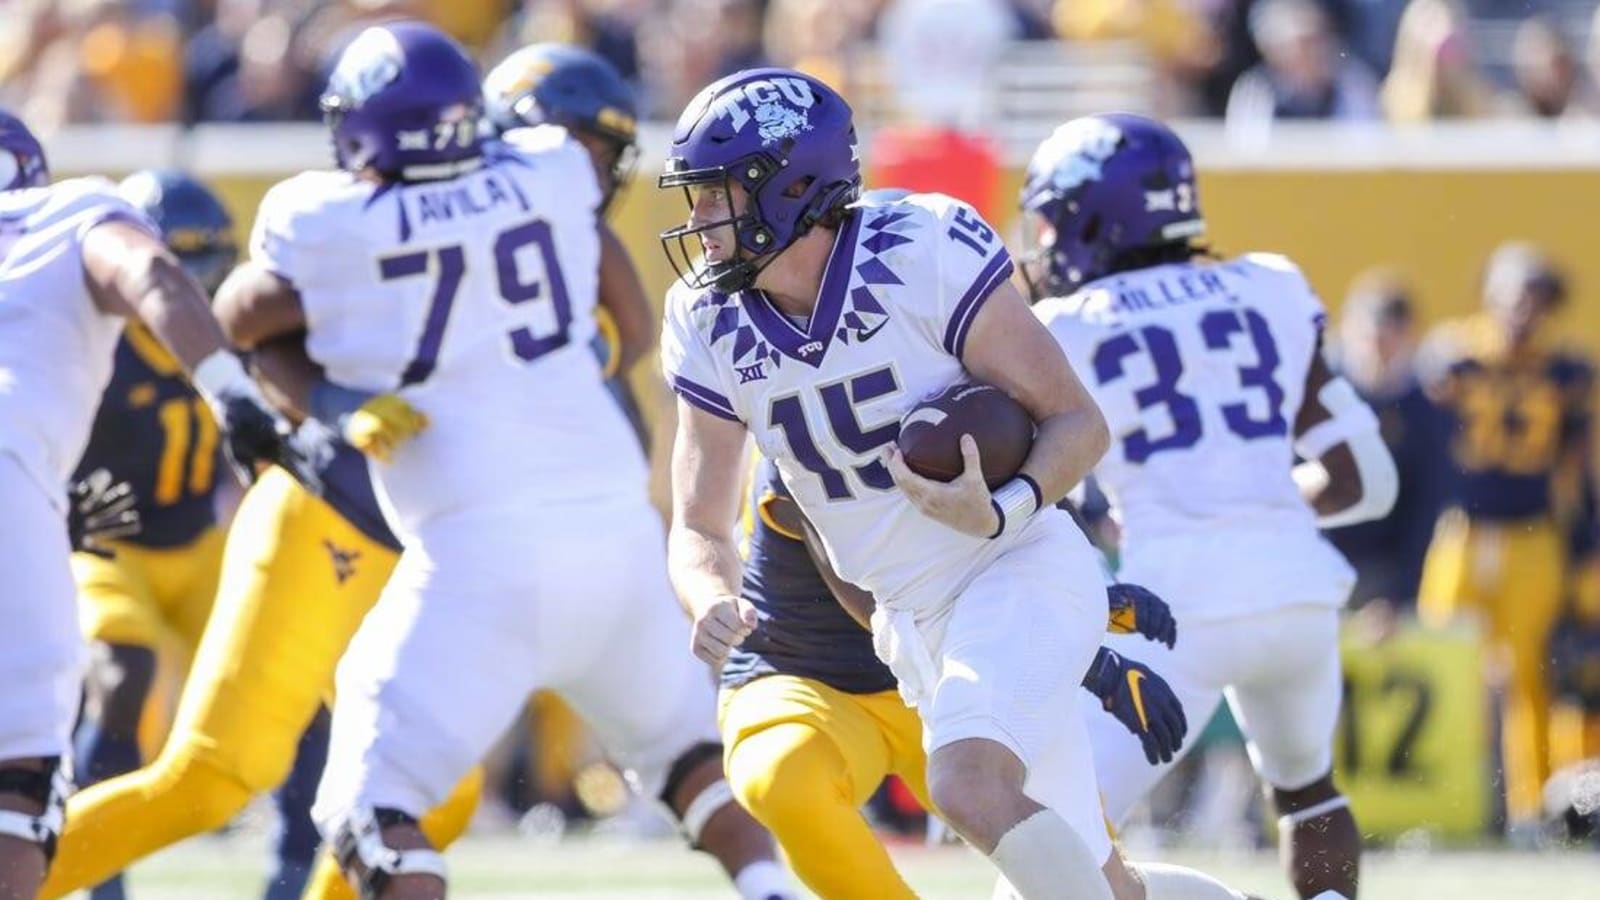 No. 7 TCU holds off West Virginia 41-31, improves to 8-0